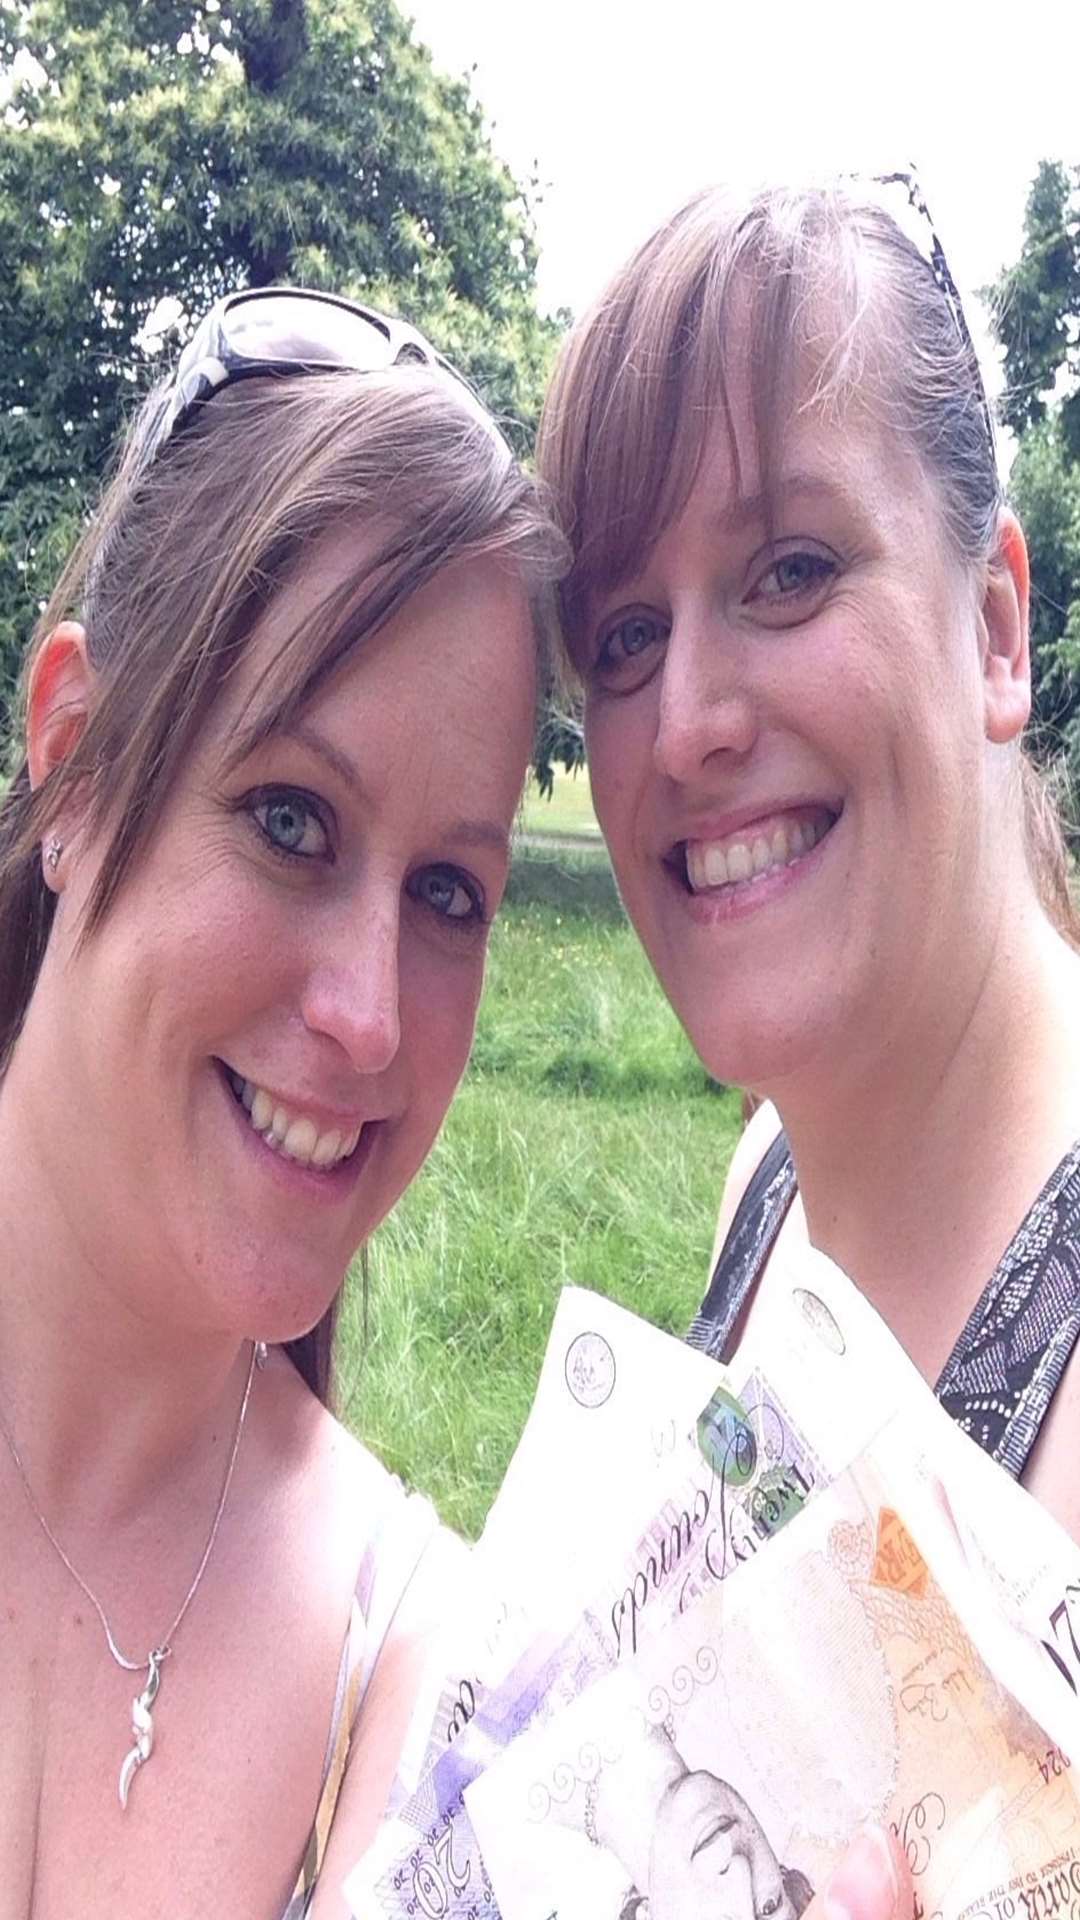 Amy and Kate Edwards tweeted this photo of themselves with the HiddenCash money